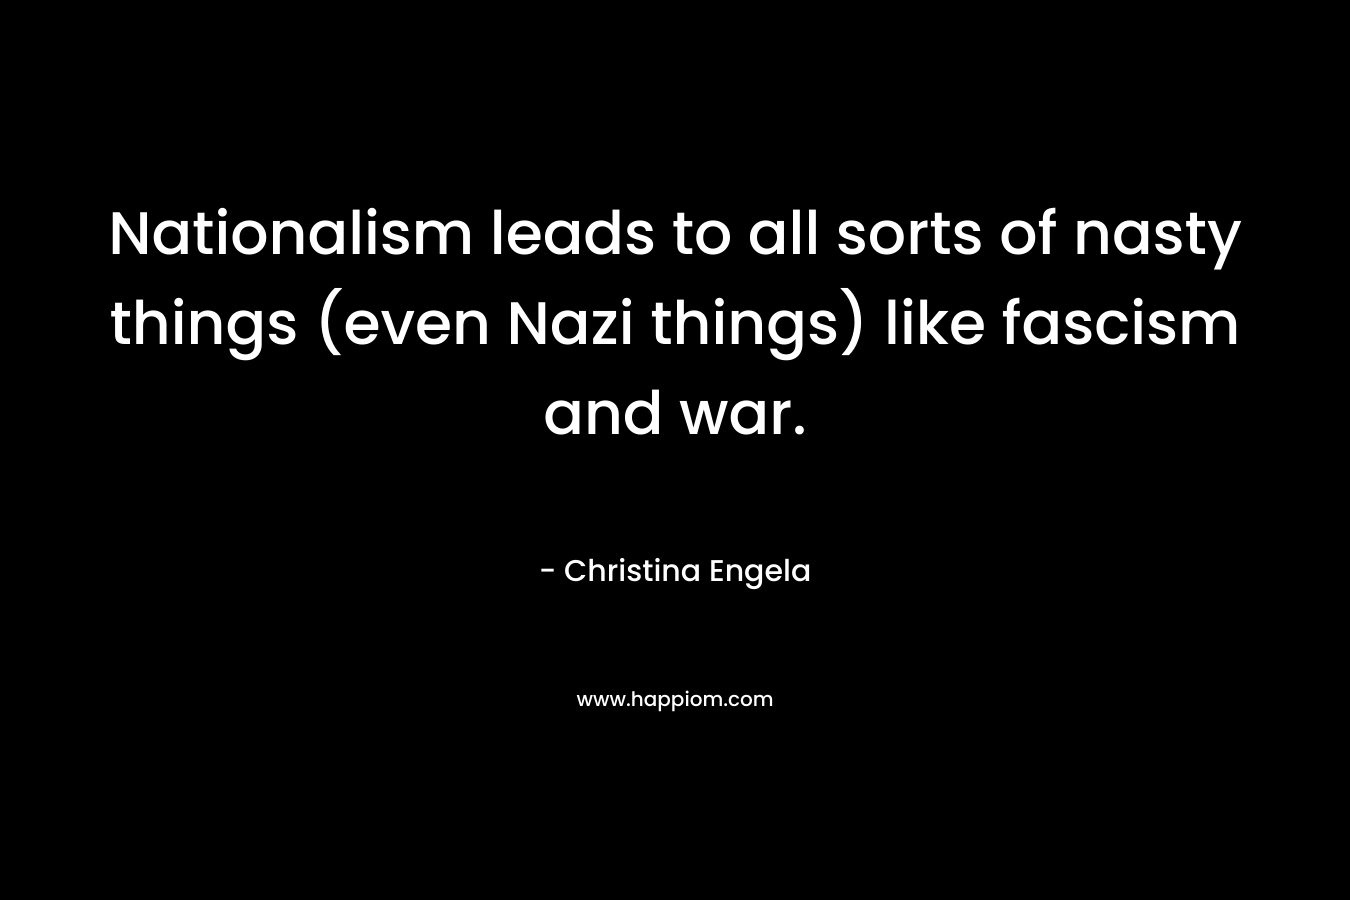 Nationalism leads to all sorts of nasty things (even Nazi things) like fascism and war.